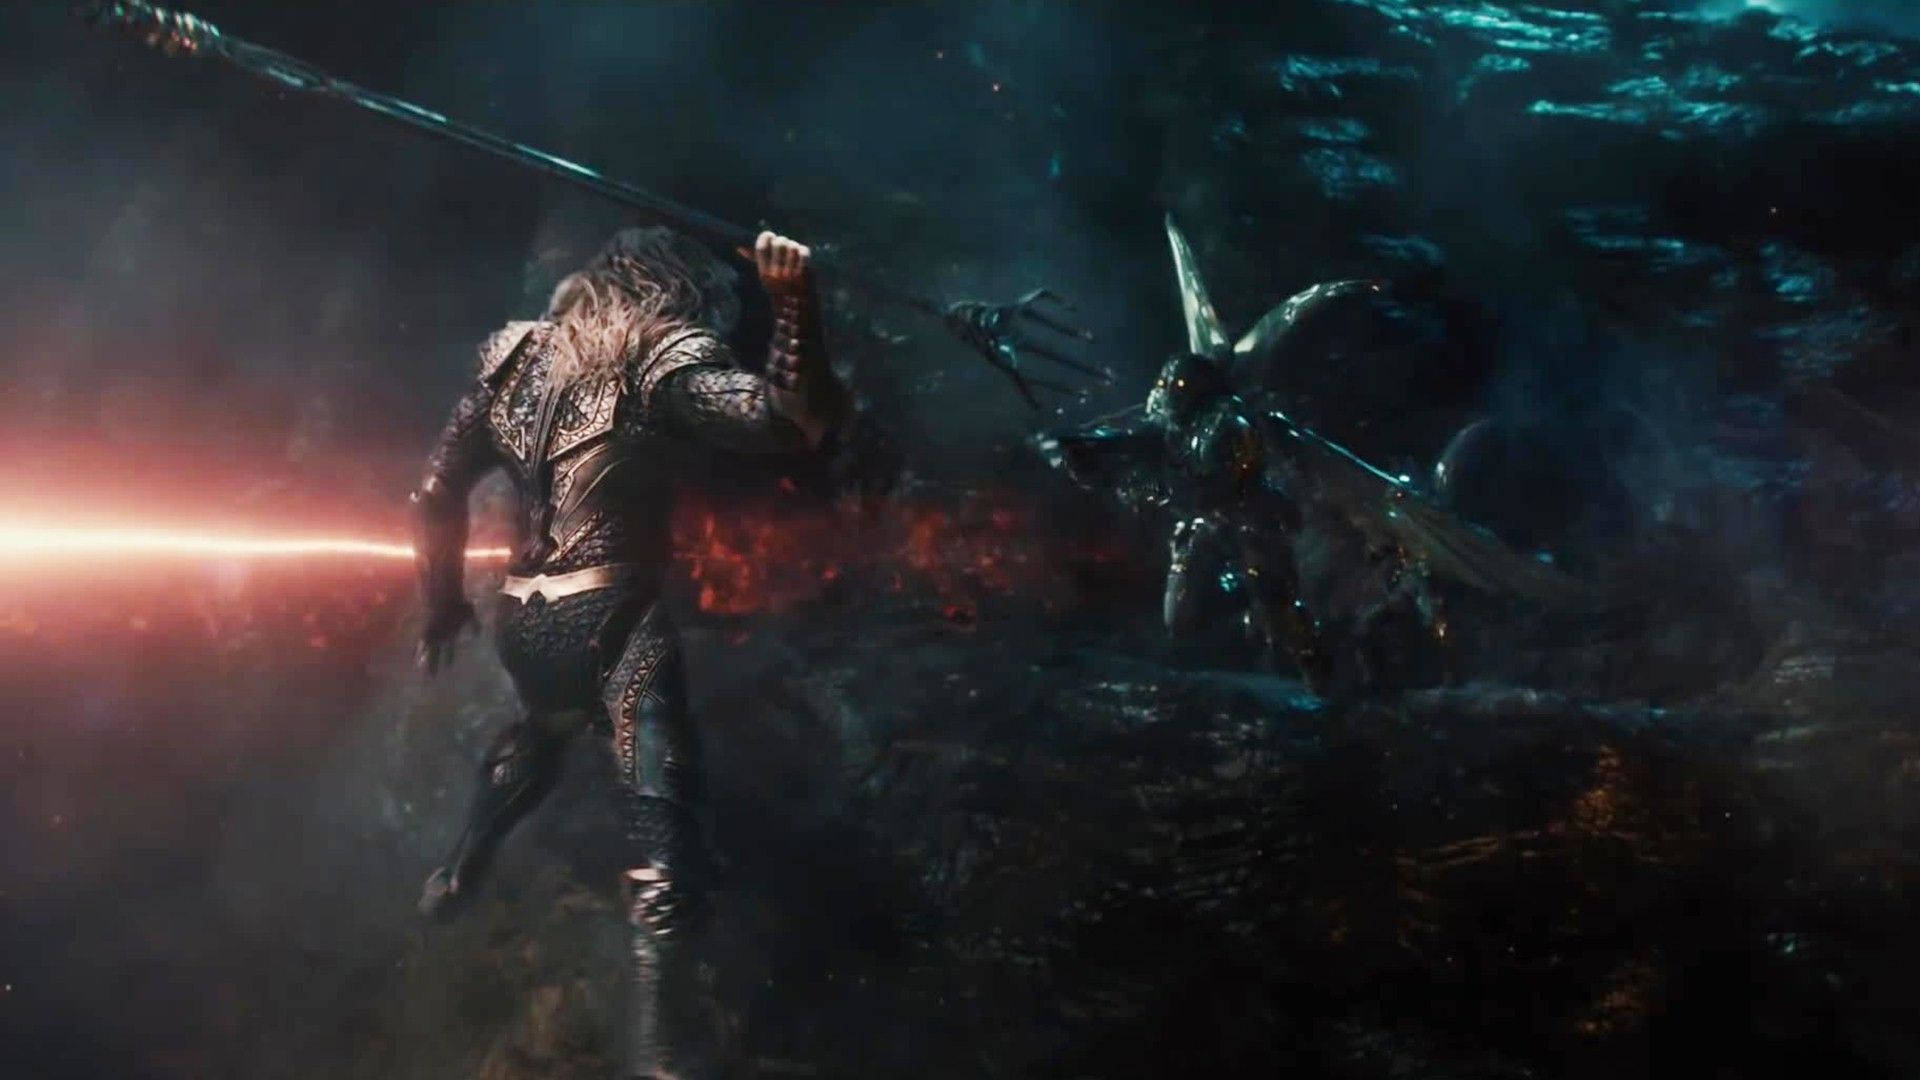 Aquaman going on an underwater adventure to battle Parademons in pursuit of peace and justice Wallpaper